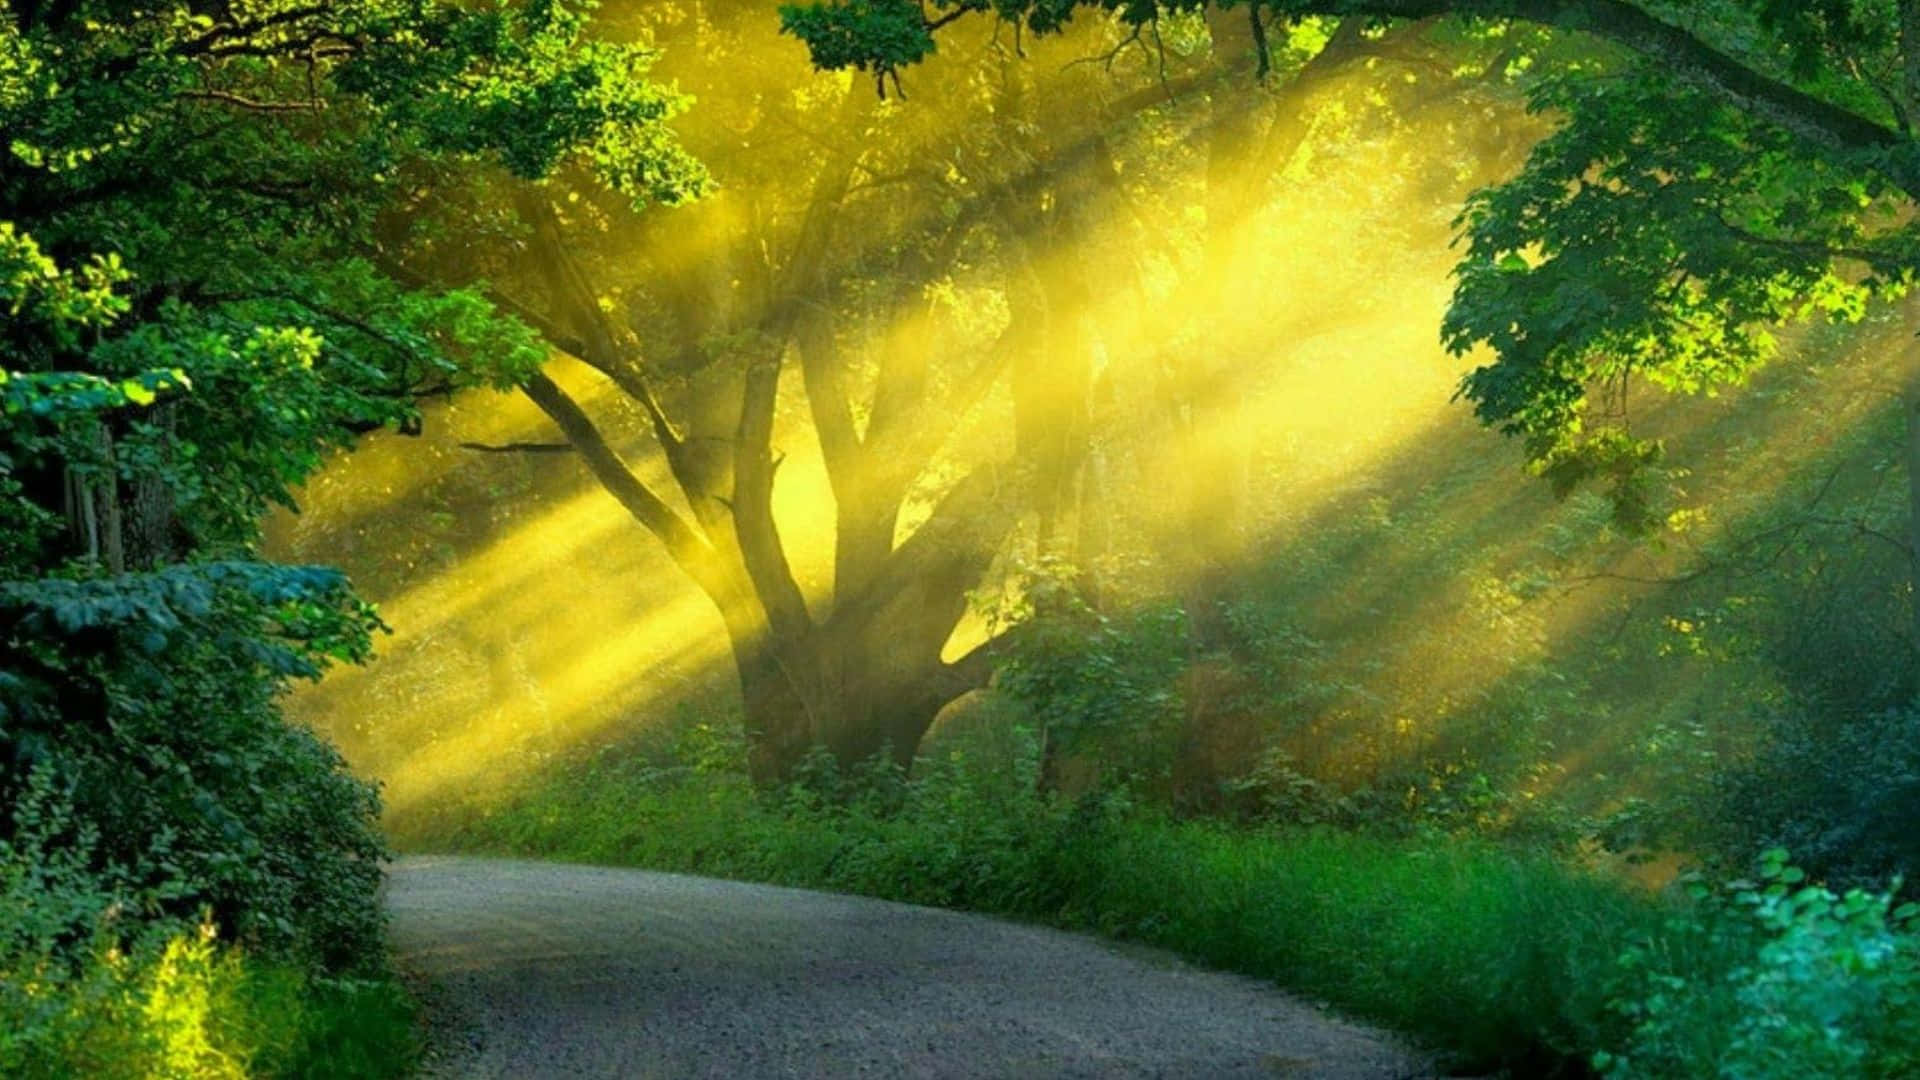 A Road With Sunlight Shining Through The Trees